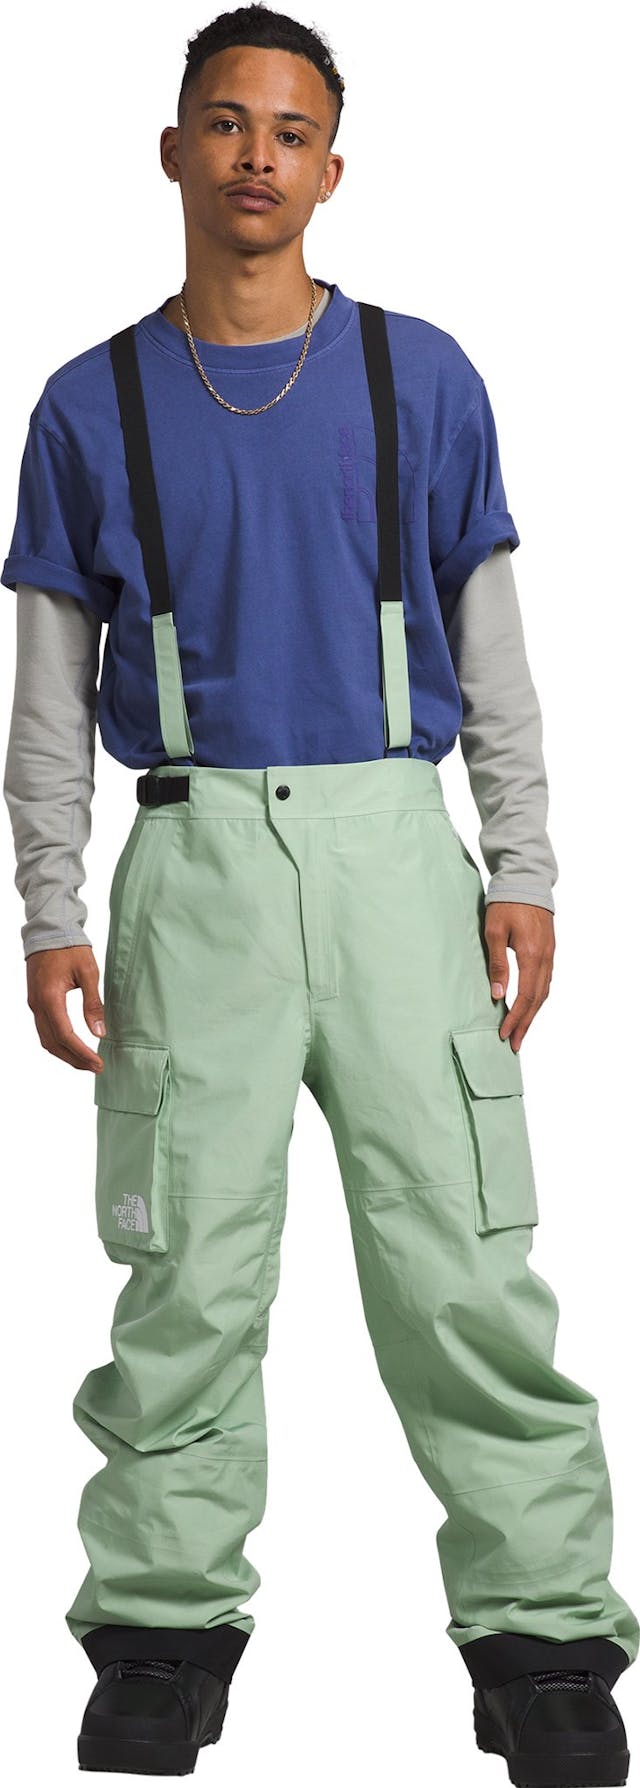 Product image for Sidecut GORE-TEX Trousers - Men's